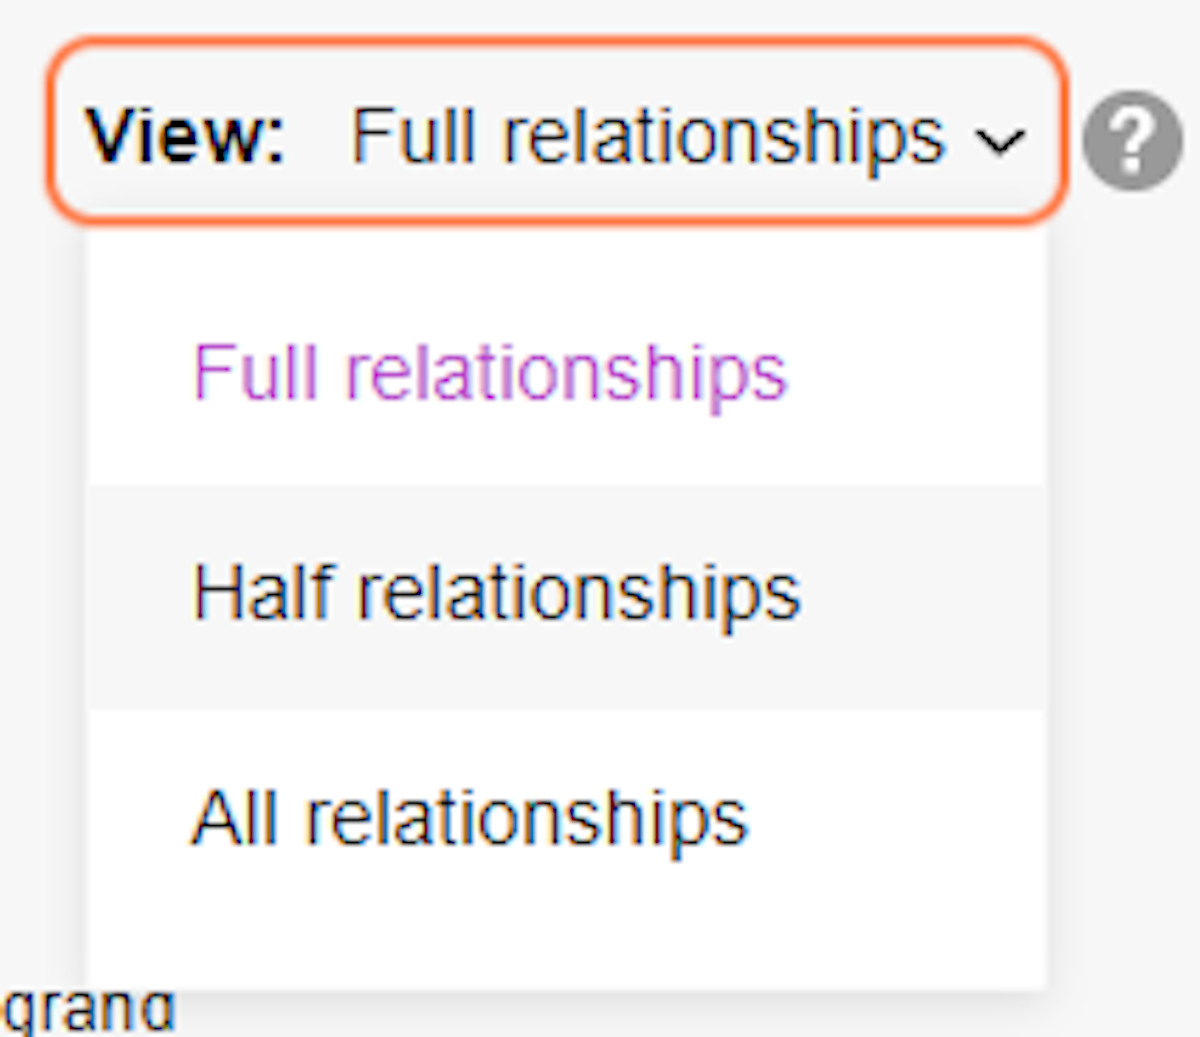 The dropdown menu gives you two additional options. The first is to show Half relationships.